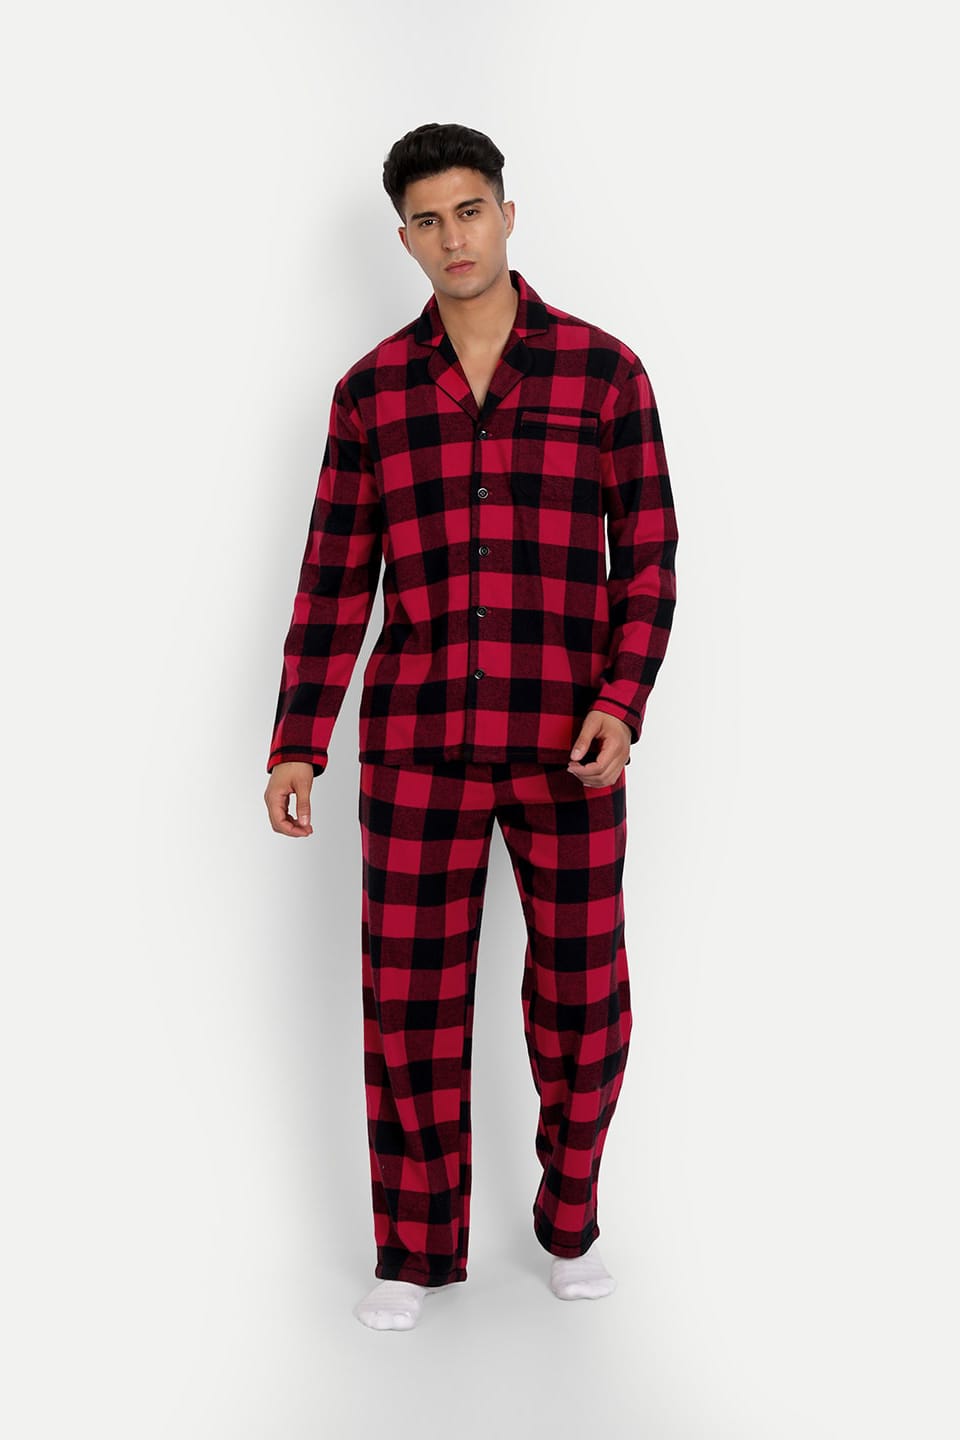 Snug Red PJ Set - Try our premium and comfortable Snug Red PJ Set,  available in various sizes for Men - Koaala